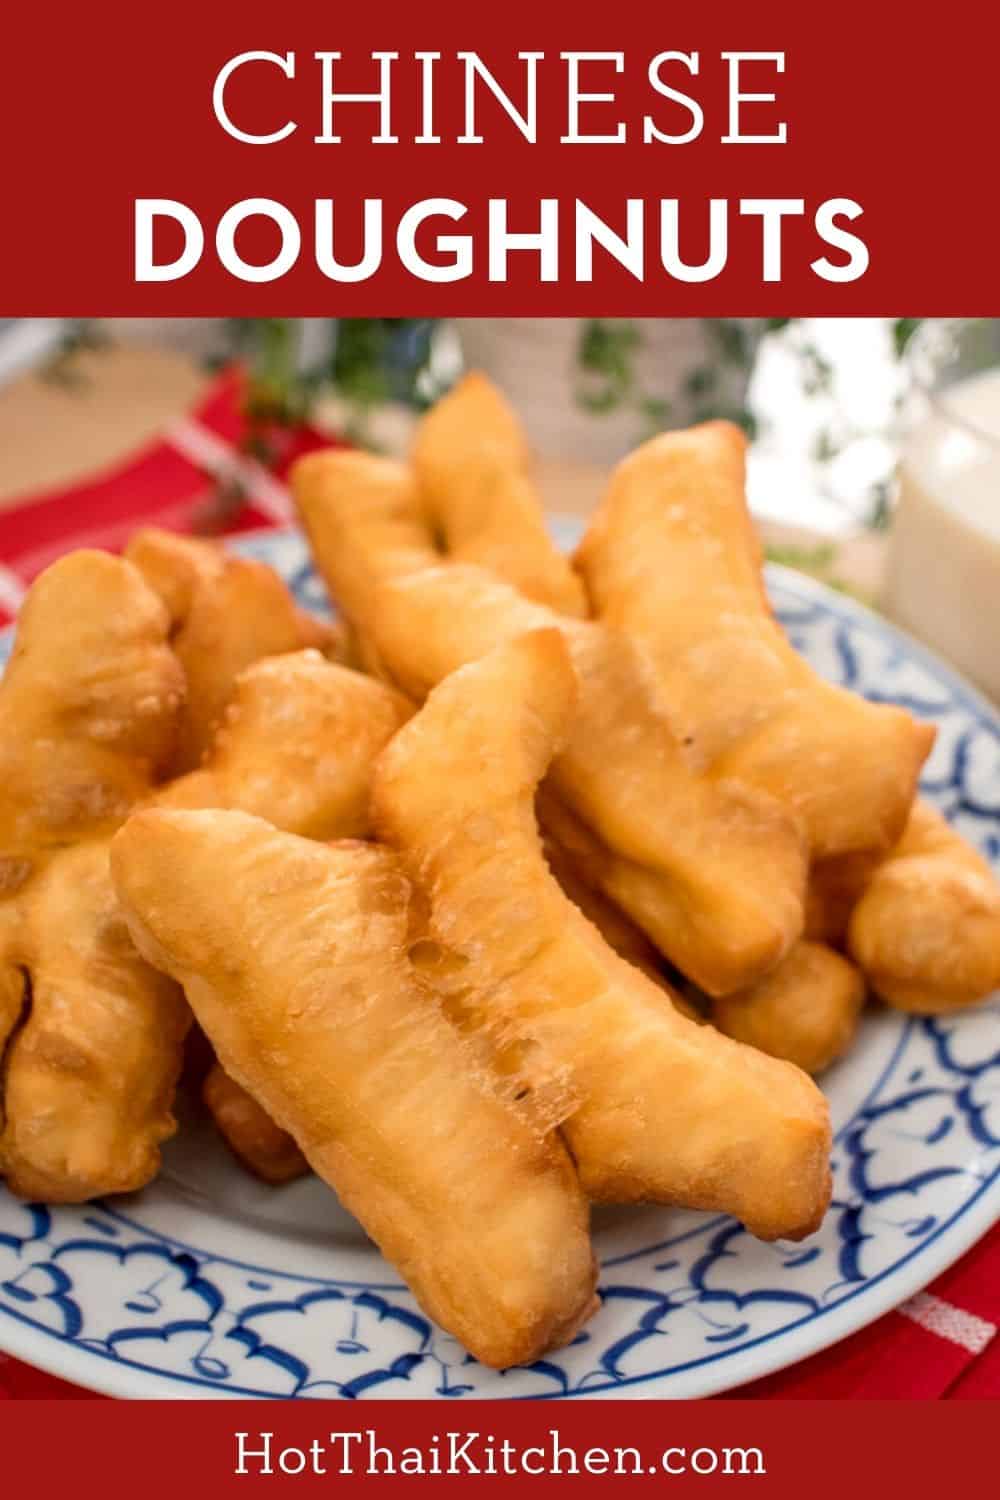 The ultimate Thai breakfast experience. This simple recipe is authentic and uses a key ingredient that yields the best, crispy, airy pa tong go, just like in Thailand! #thaifood #streetfood #chinesedoughnuts